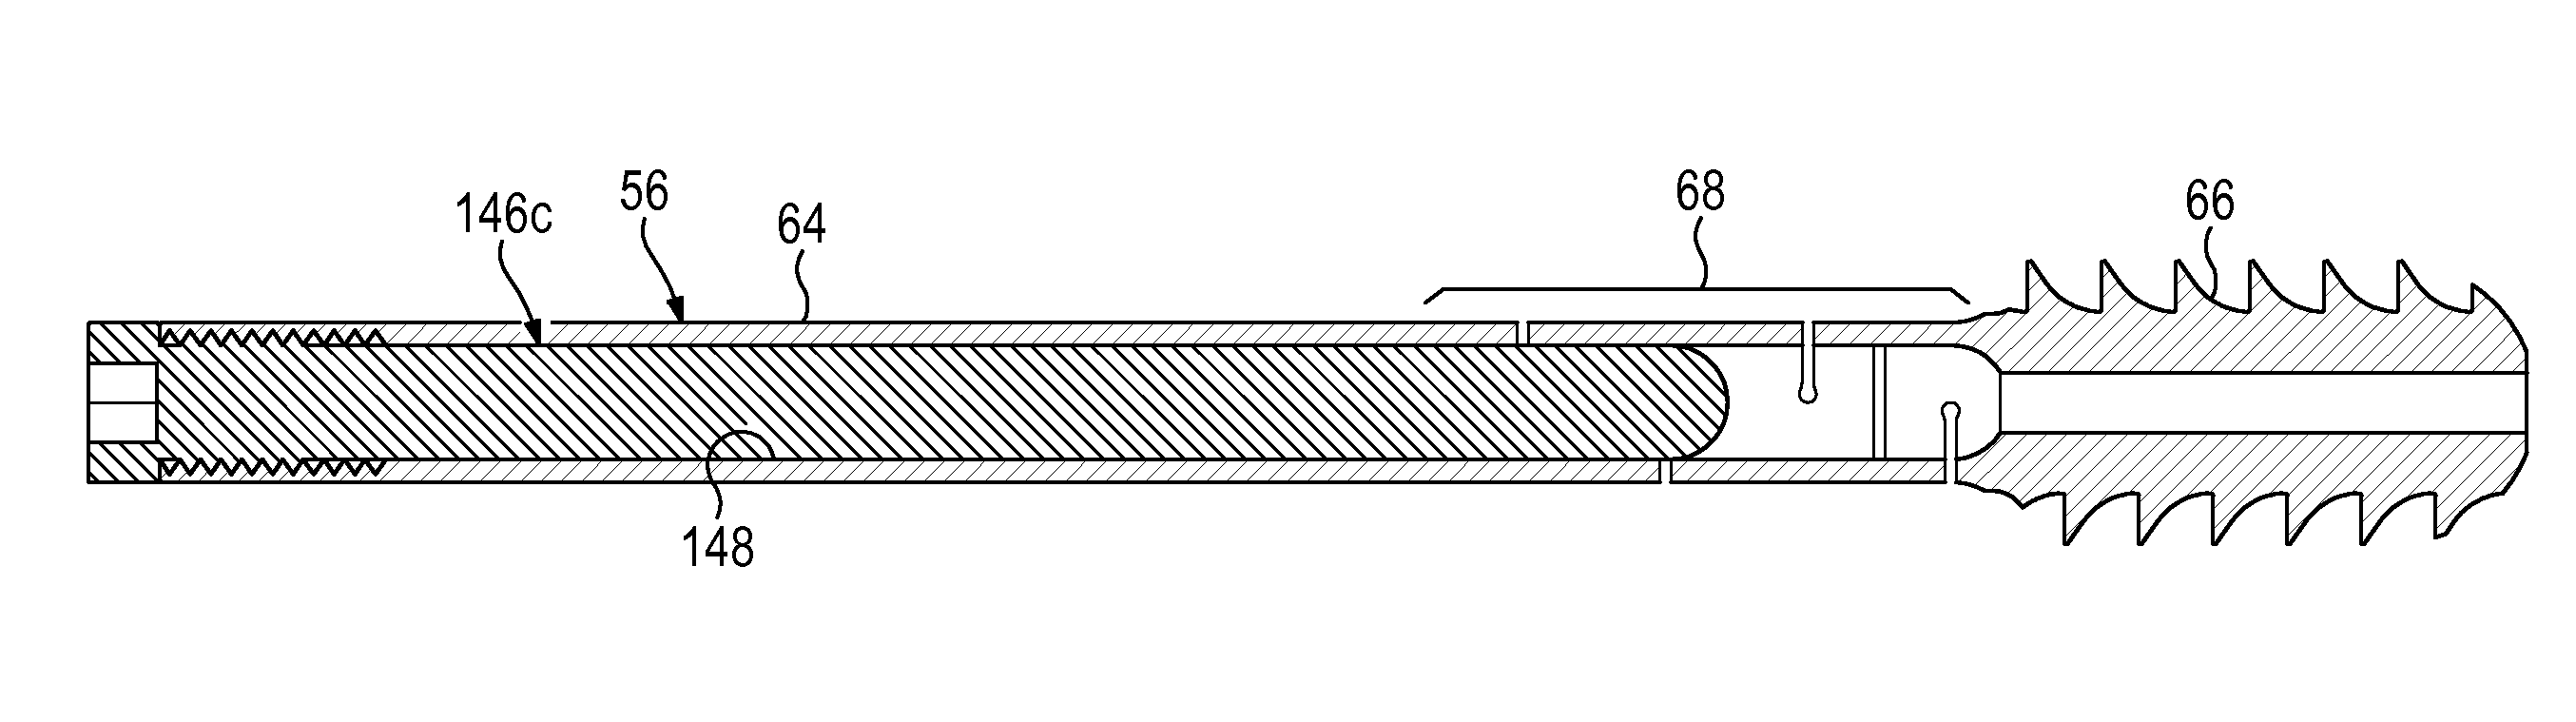 Hip fixation system with a compliant fixation element